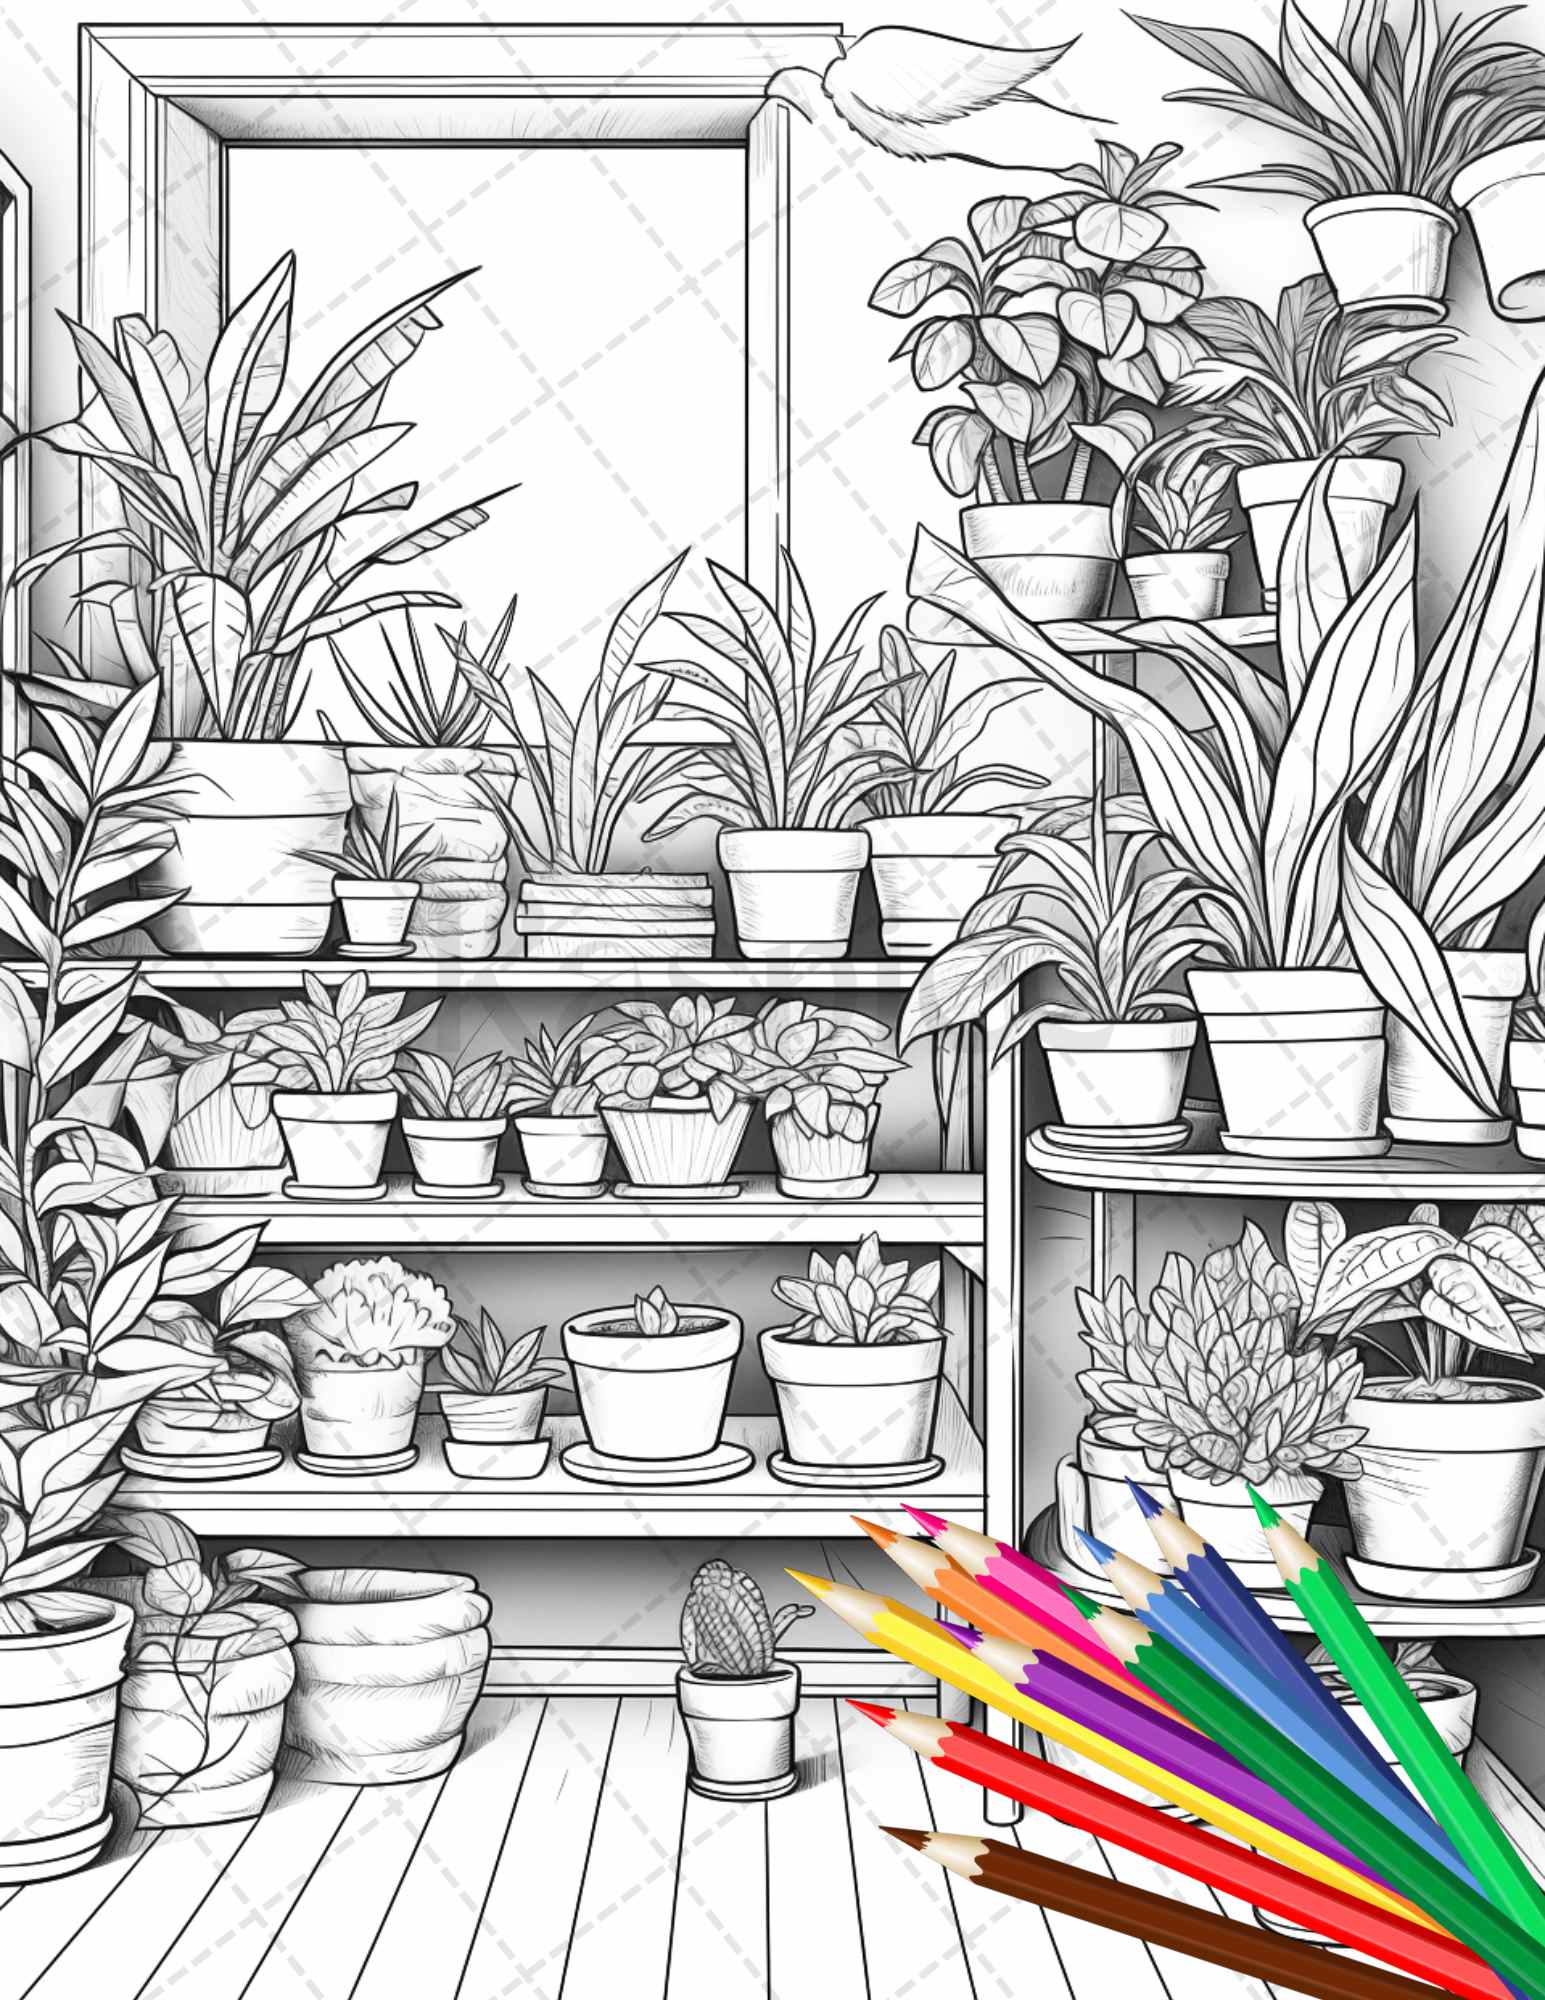 38 Indoor Houseplants Coloring Pages Printable for Adults, Grayscale Coloring Page, PDF File Instant Download - raspiee